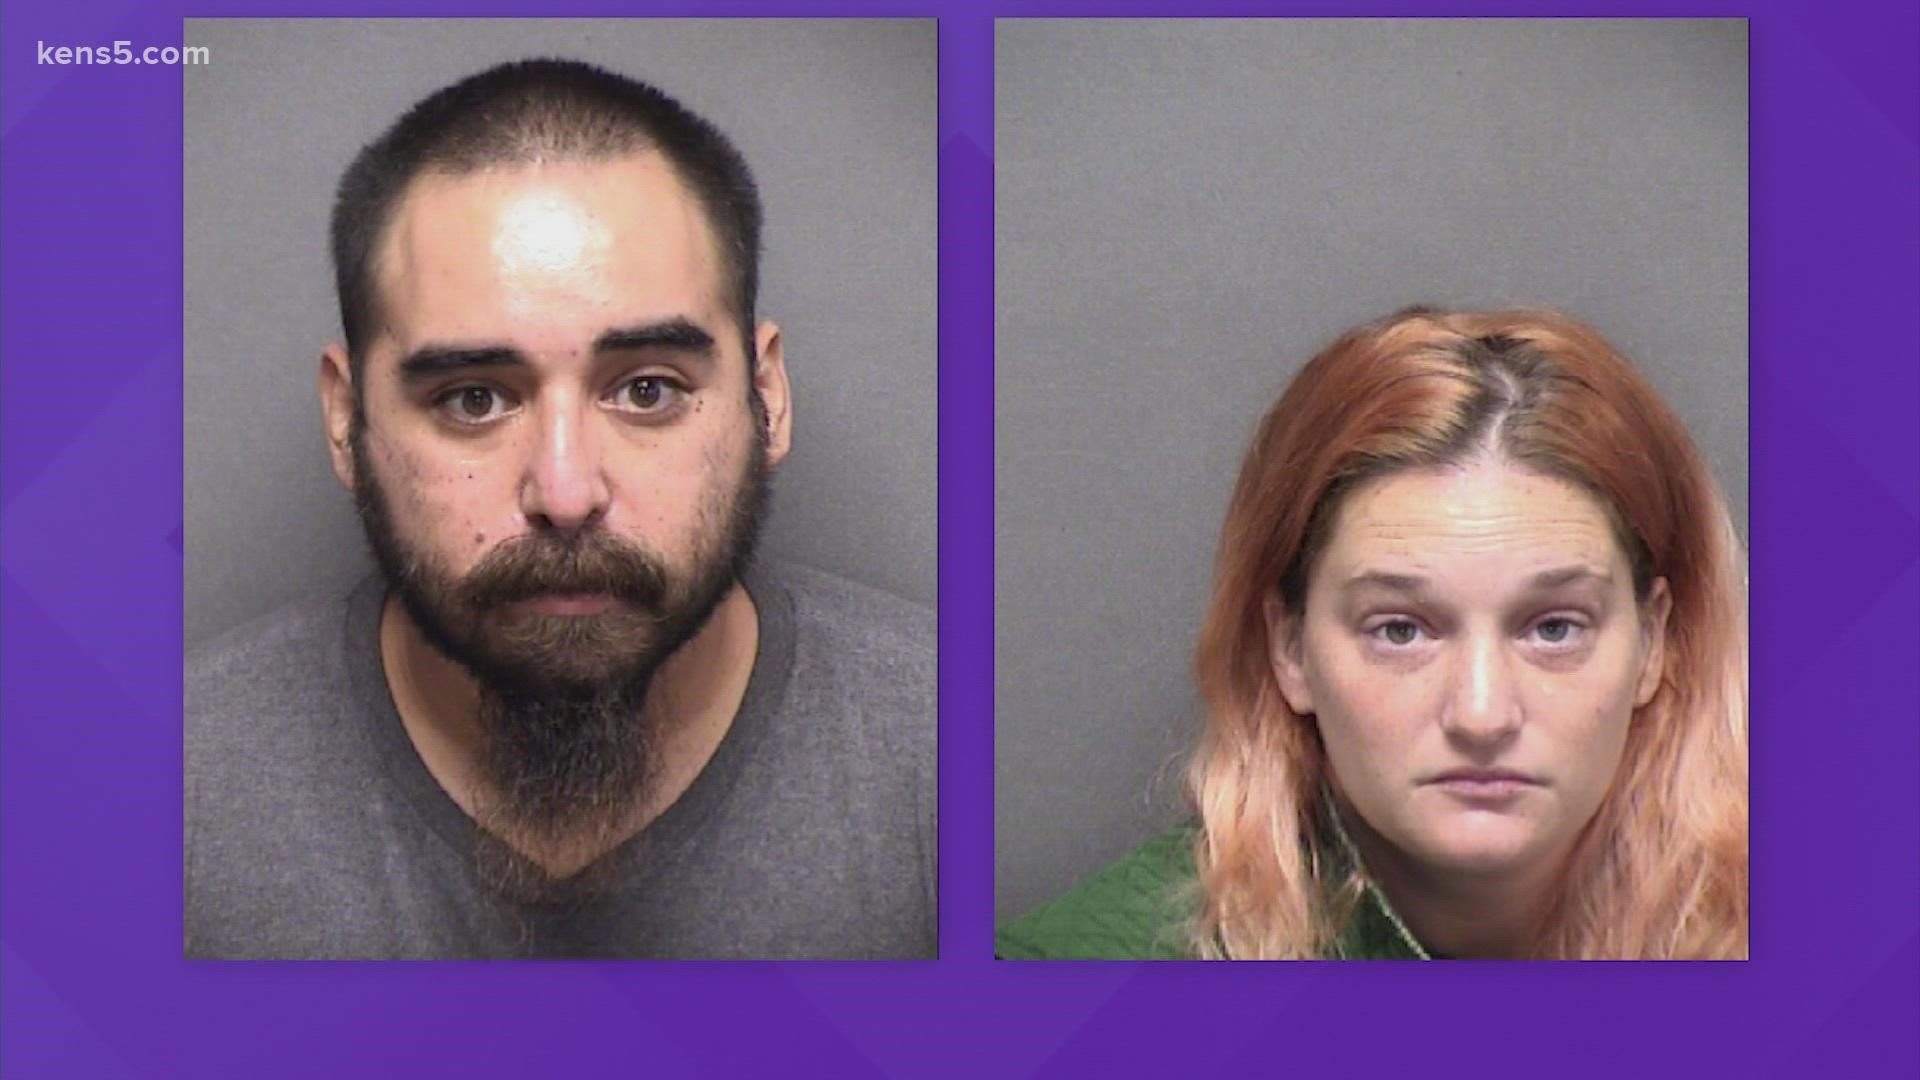 1920px x 1080px - Couple facing several child sex charges, investigators fear there may be  more victims | kens5.com